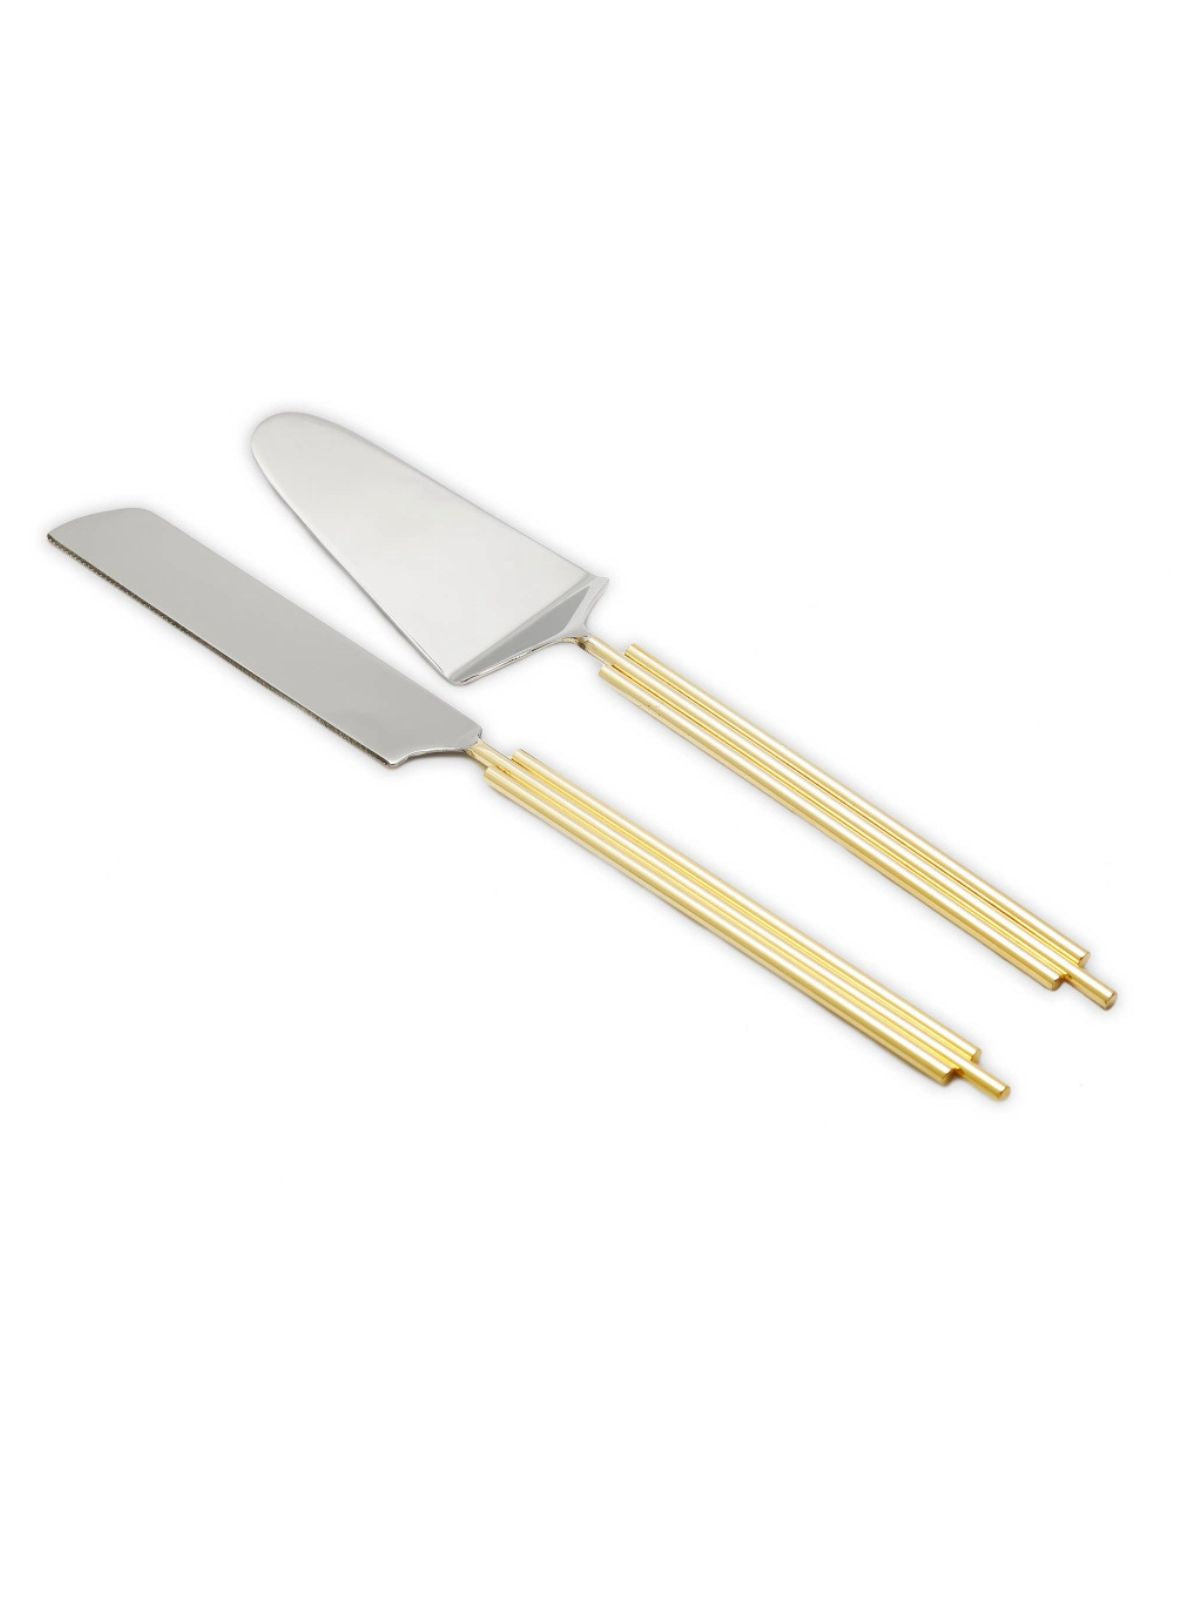 Set of 2 Stainless Steel Cake Servers With Gold Diamond Designed Handles - KYA Home Decor